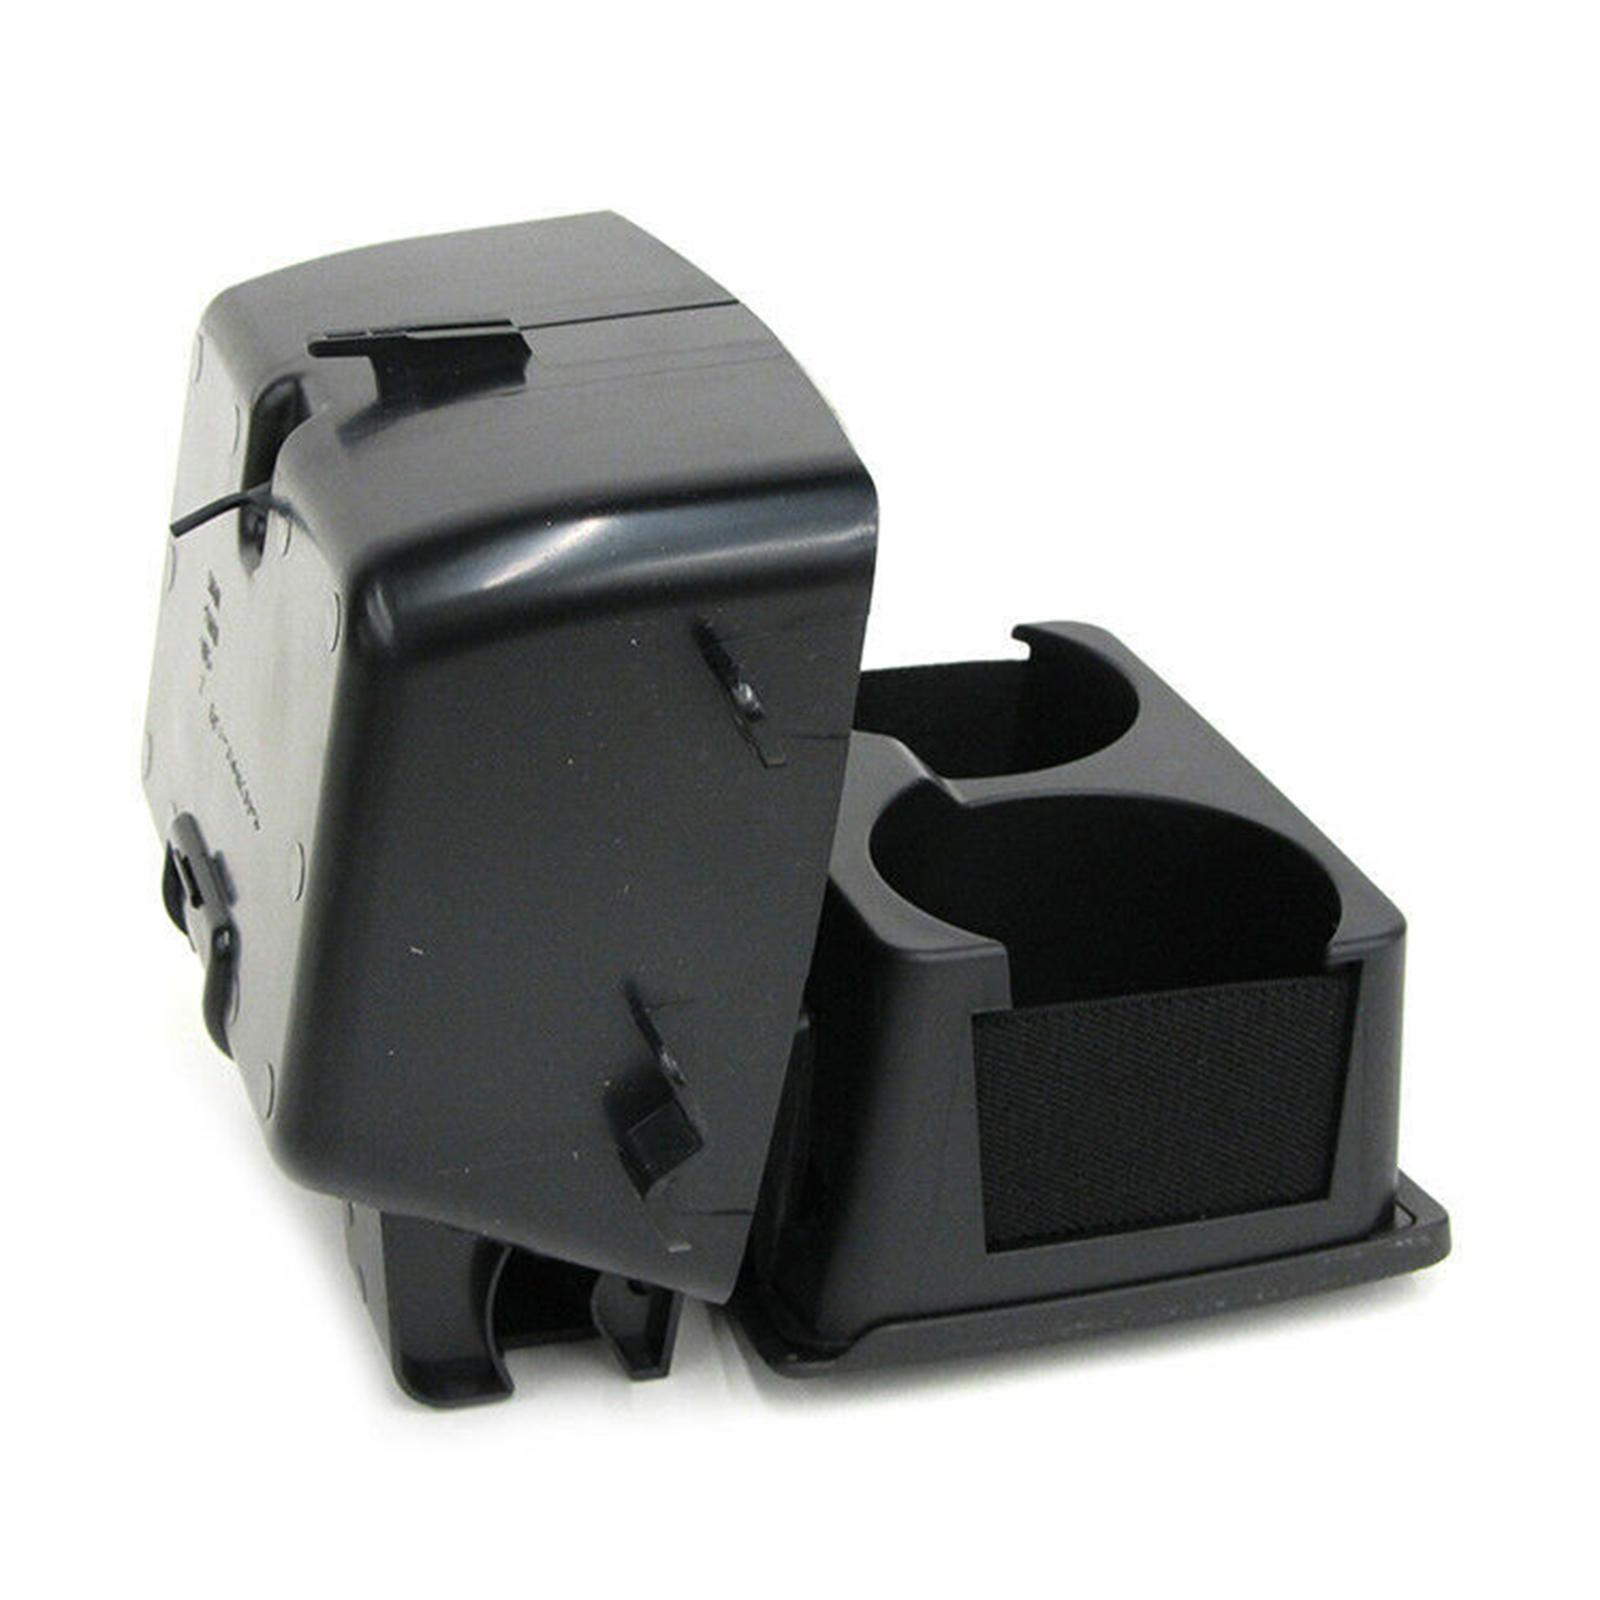 Center Console Cup Holder Attachment  for   2011-2015